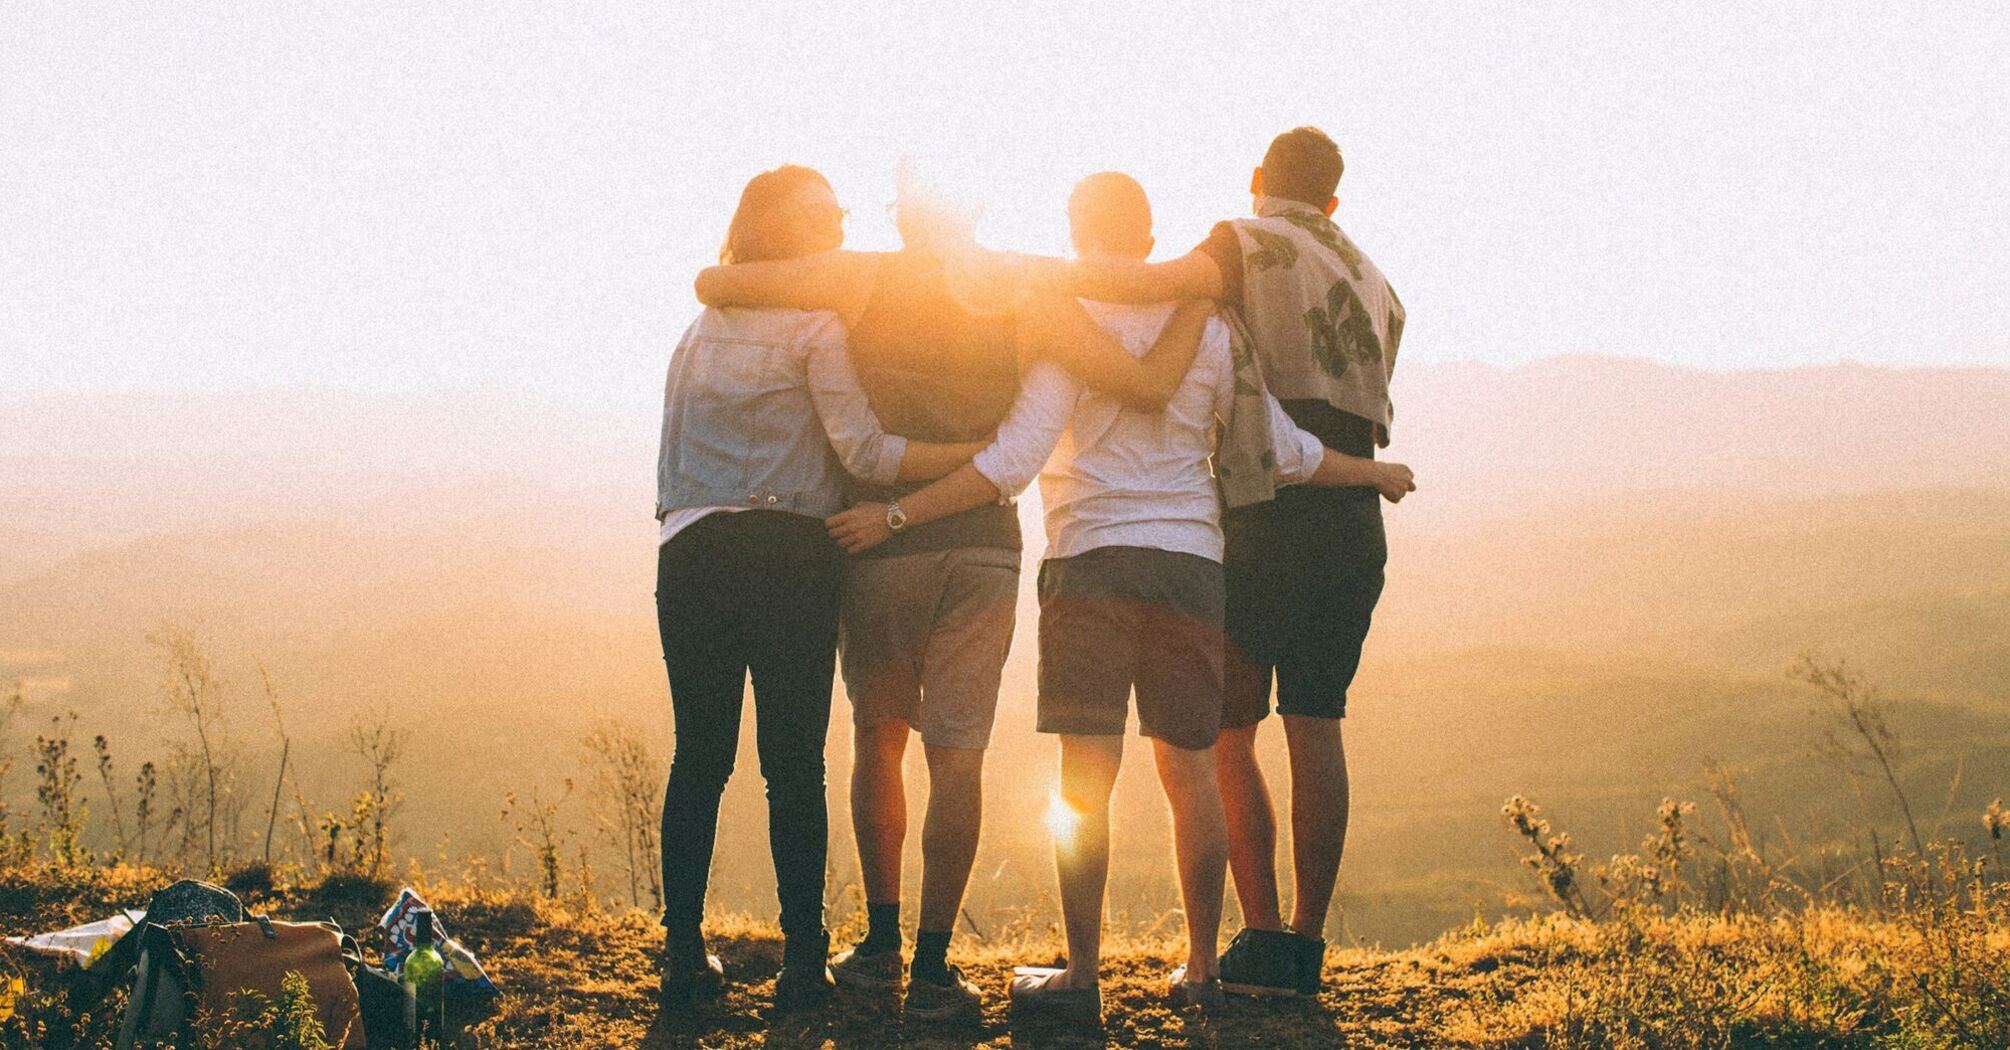 Four friends standing together, embracing at sunset